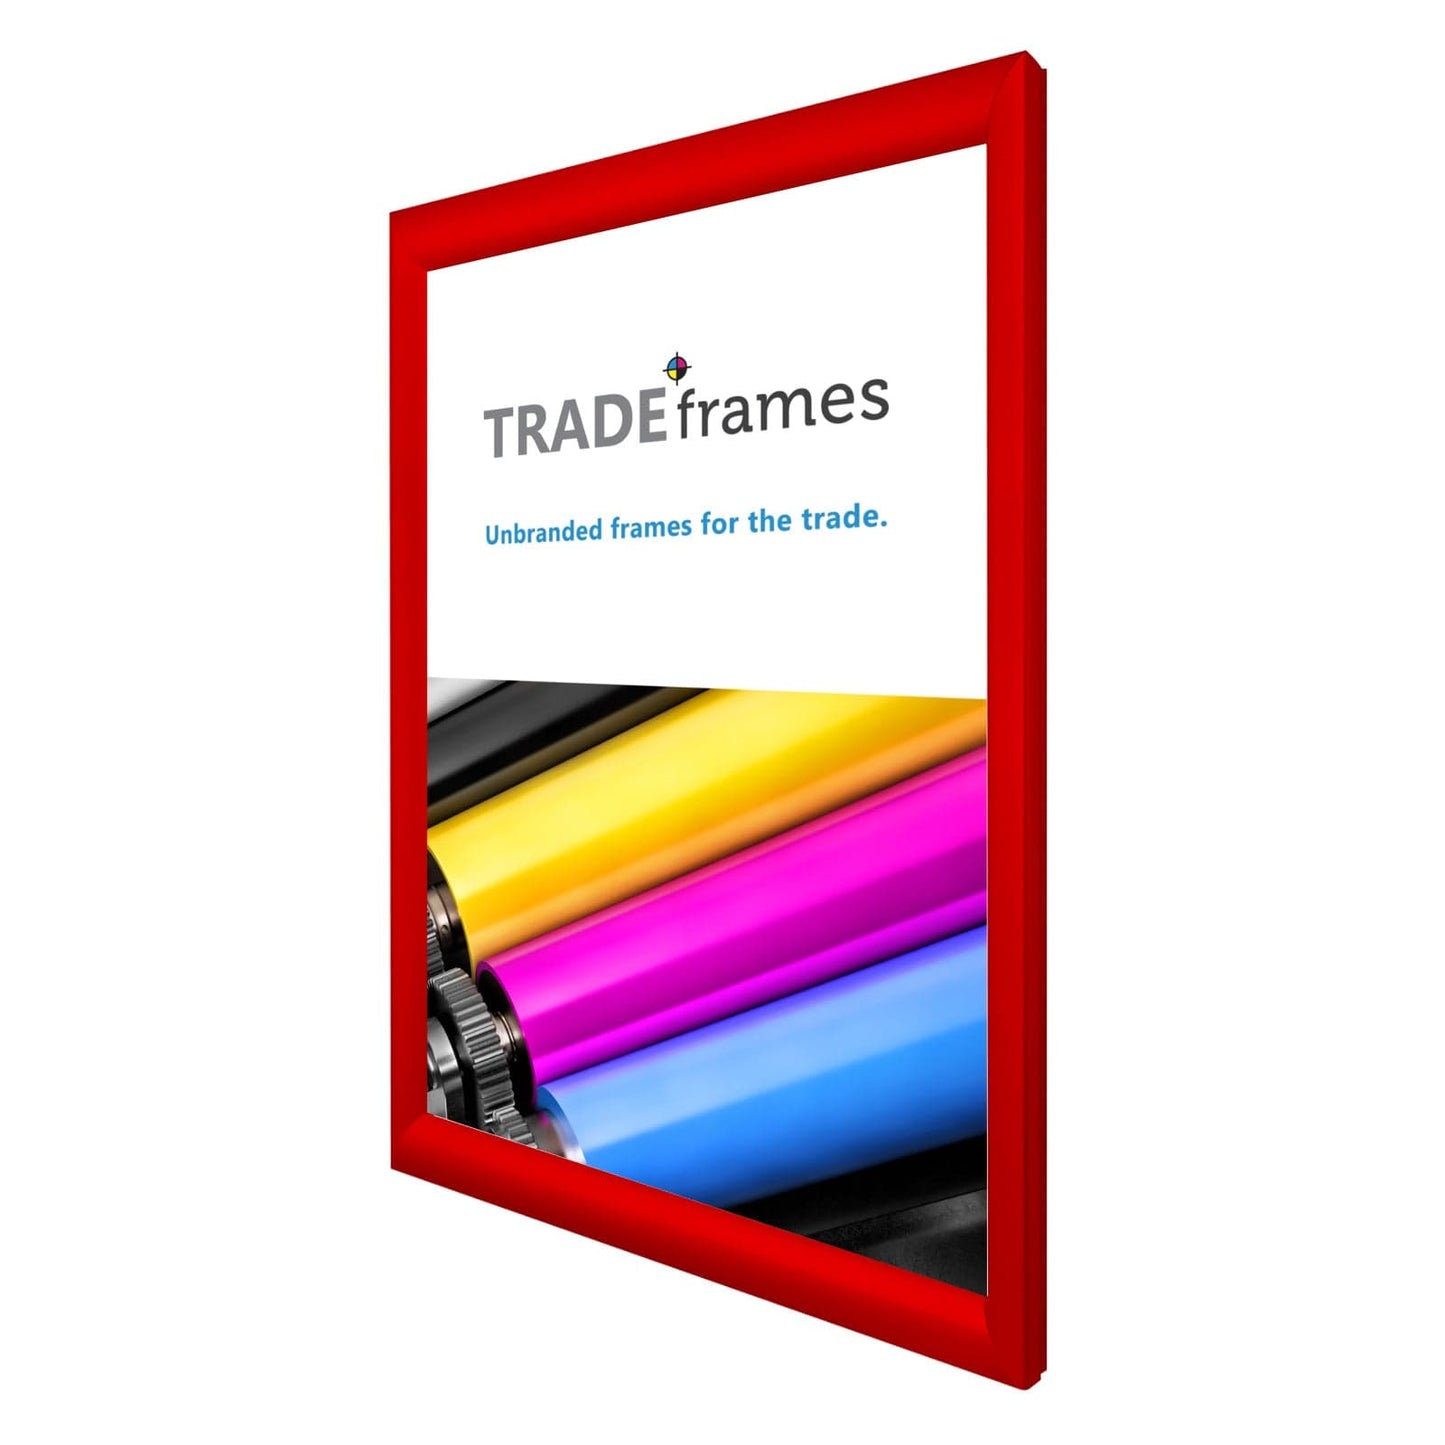 12x18  TRADEframe Red Snap Frame 12x18 - 1.2 inch profile - Snap Frames Direct